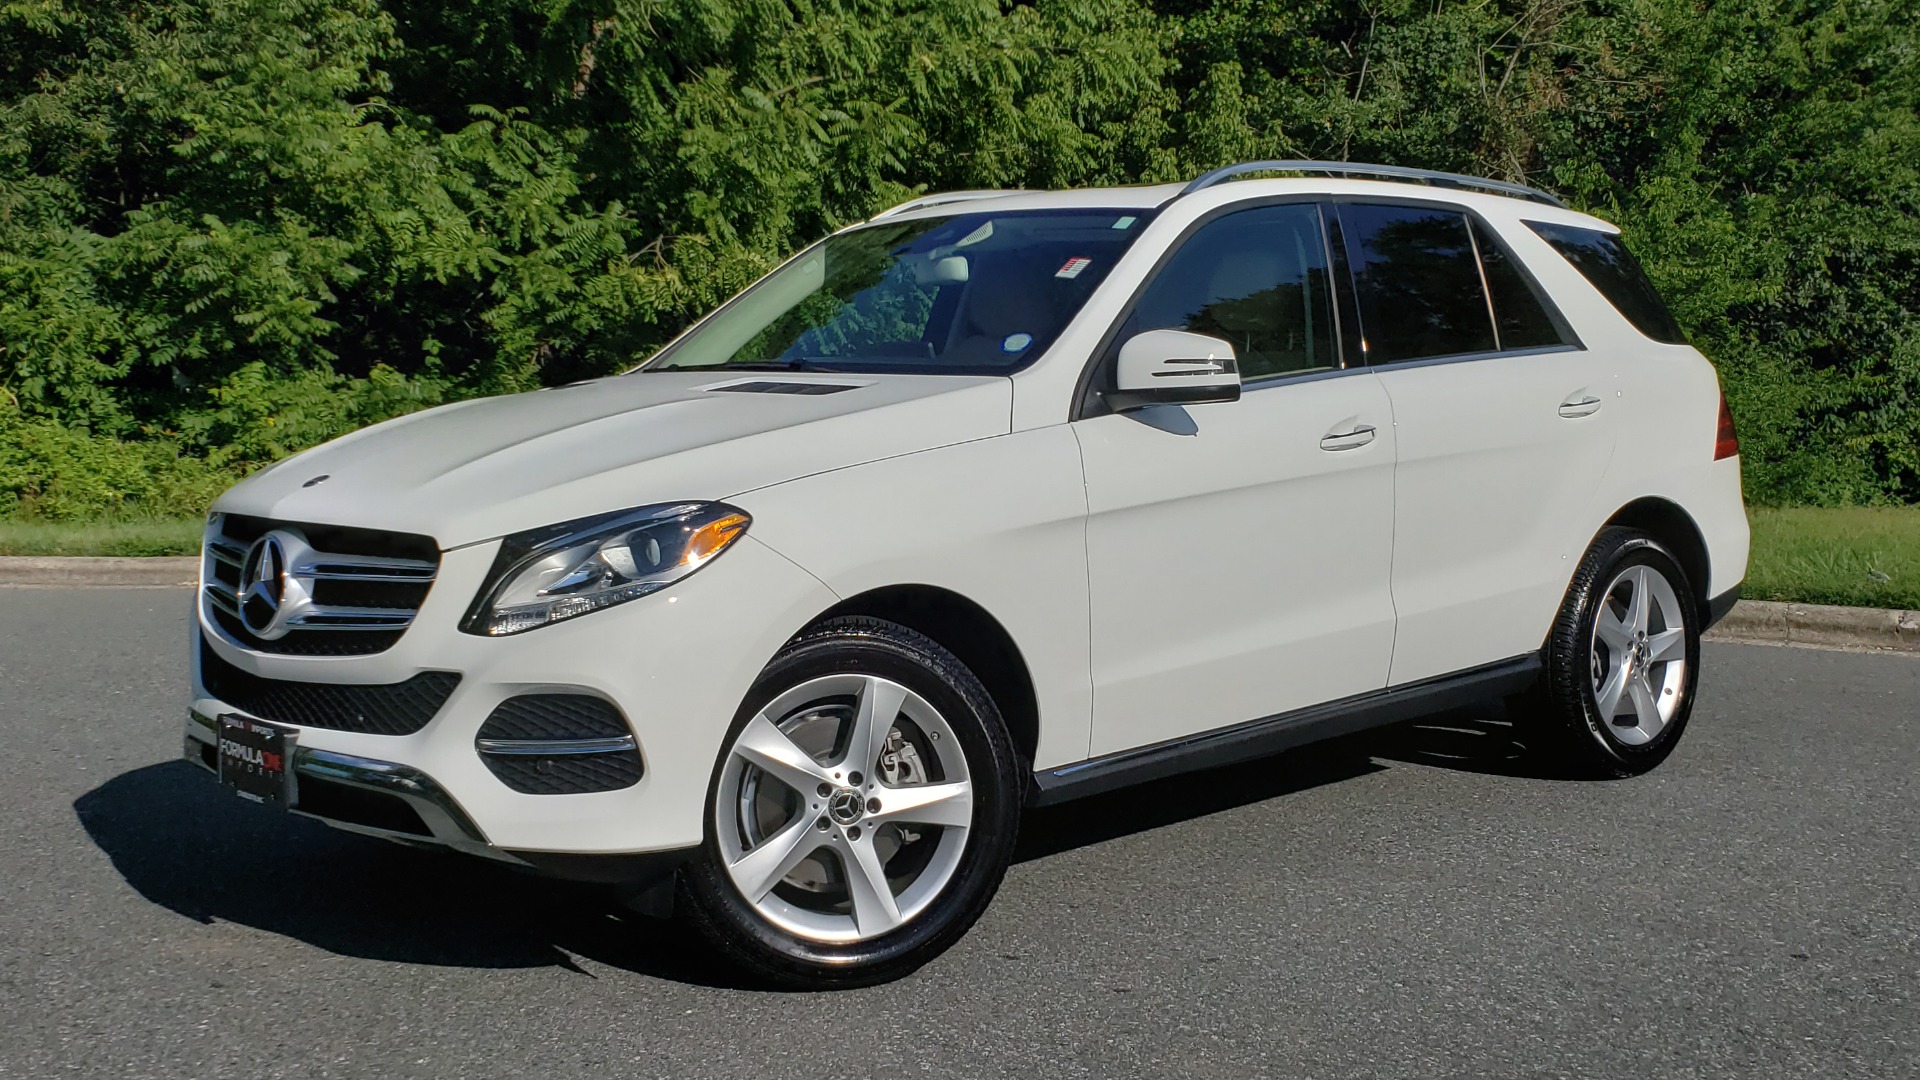 Used 2018 Mercedes-Benz GLE 350 4MATIC PREMIUM / NAV / SUNROOF / H/K SND / REARVIEW for sale Sold at Formula Imports in Charlotte NC 28227 1